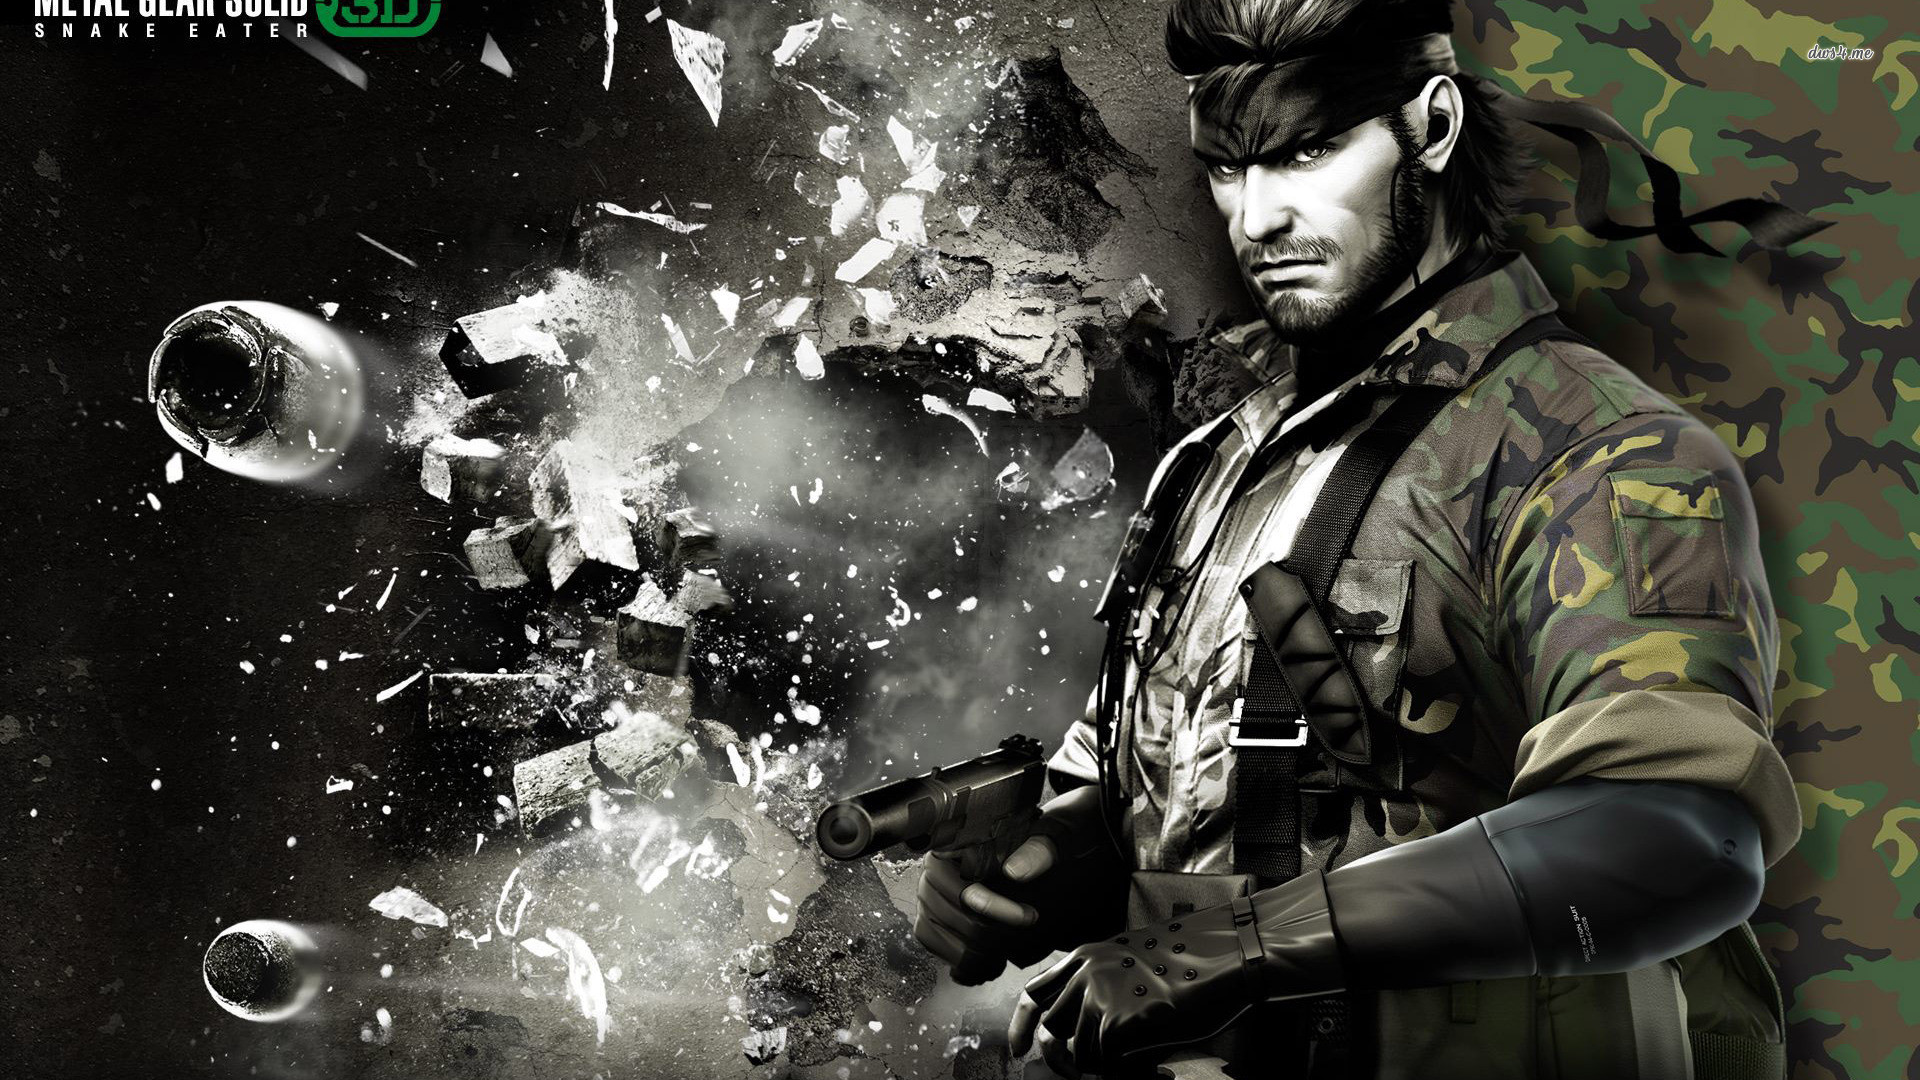 metal gear solid wallpaper,action adventure game,pc game,shooter game,movie,fictional character